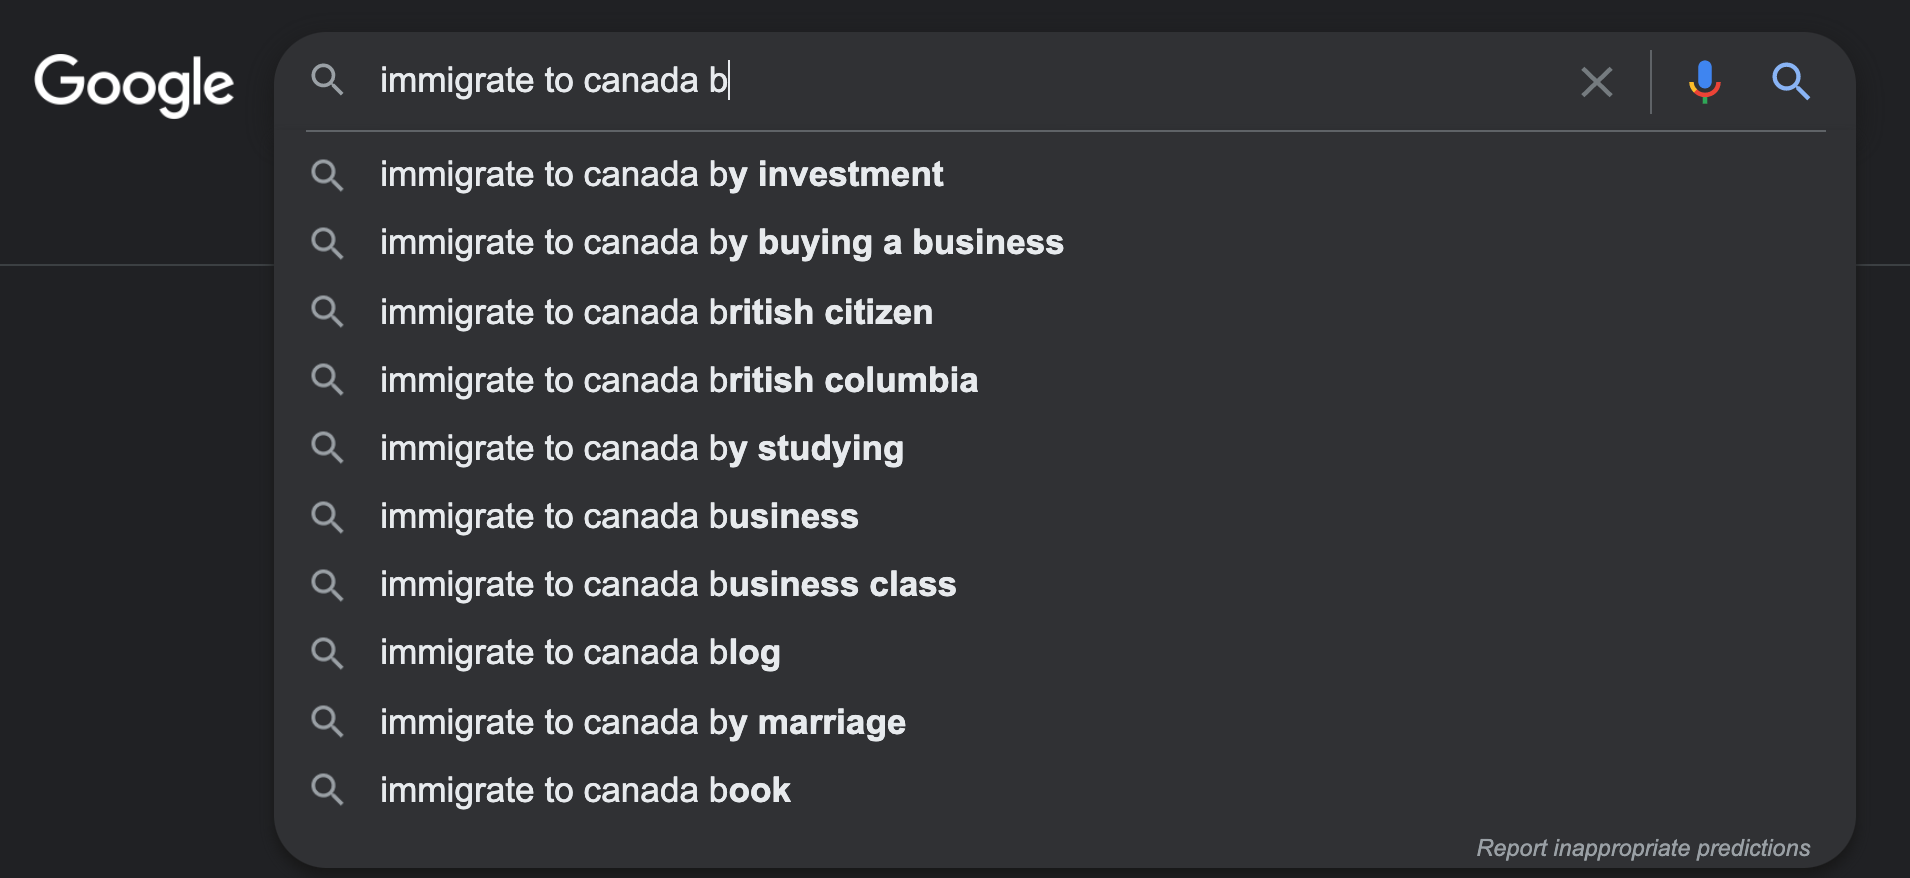 A screenshot of a Google Search bar with the query "immigrate to Canada b" to show how immigration law firms get new blog post topic ideas.